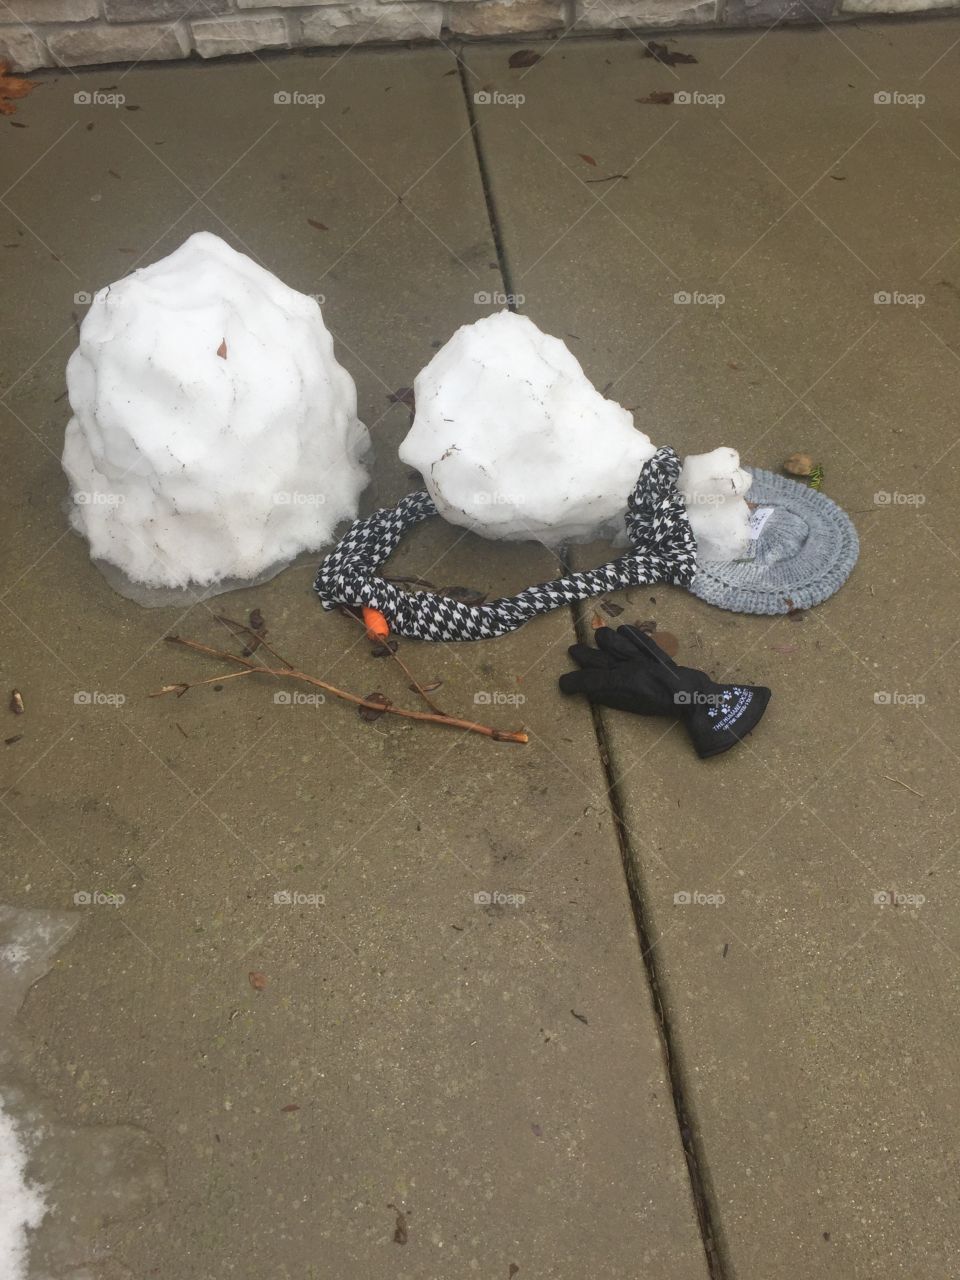 Melted snowman